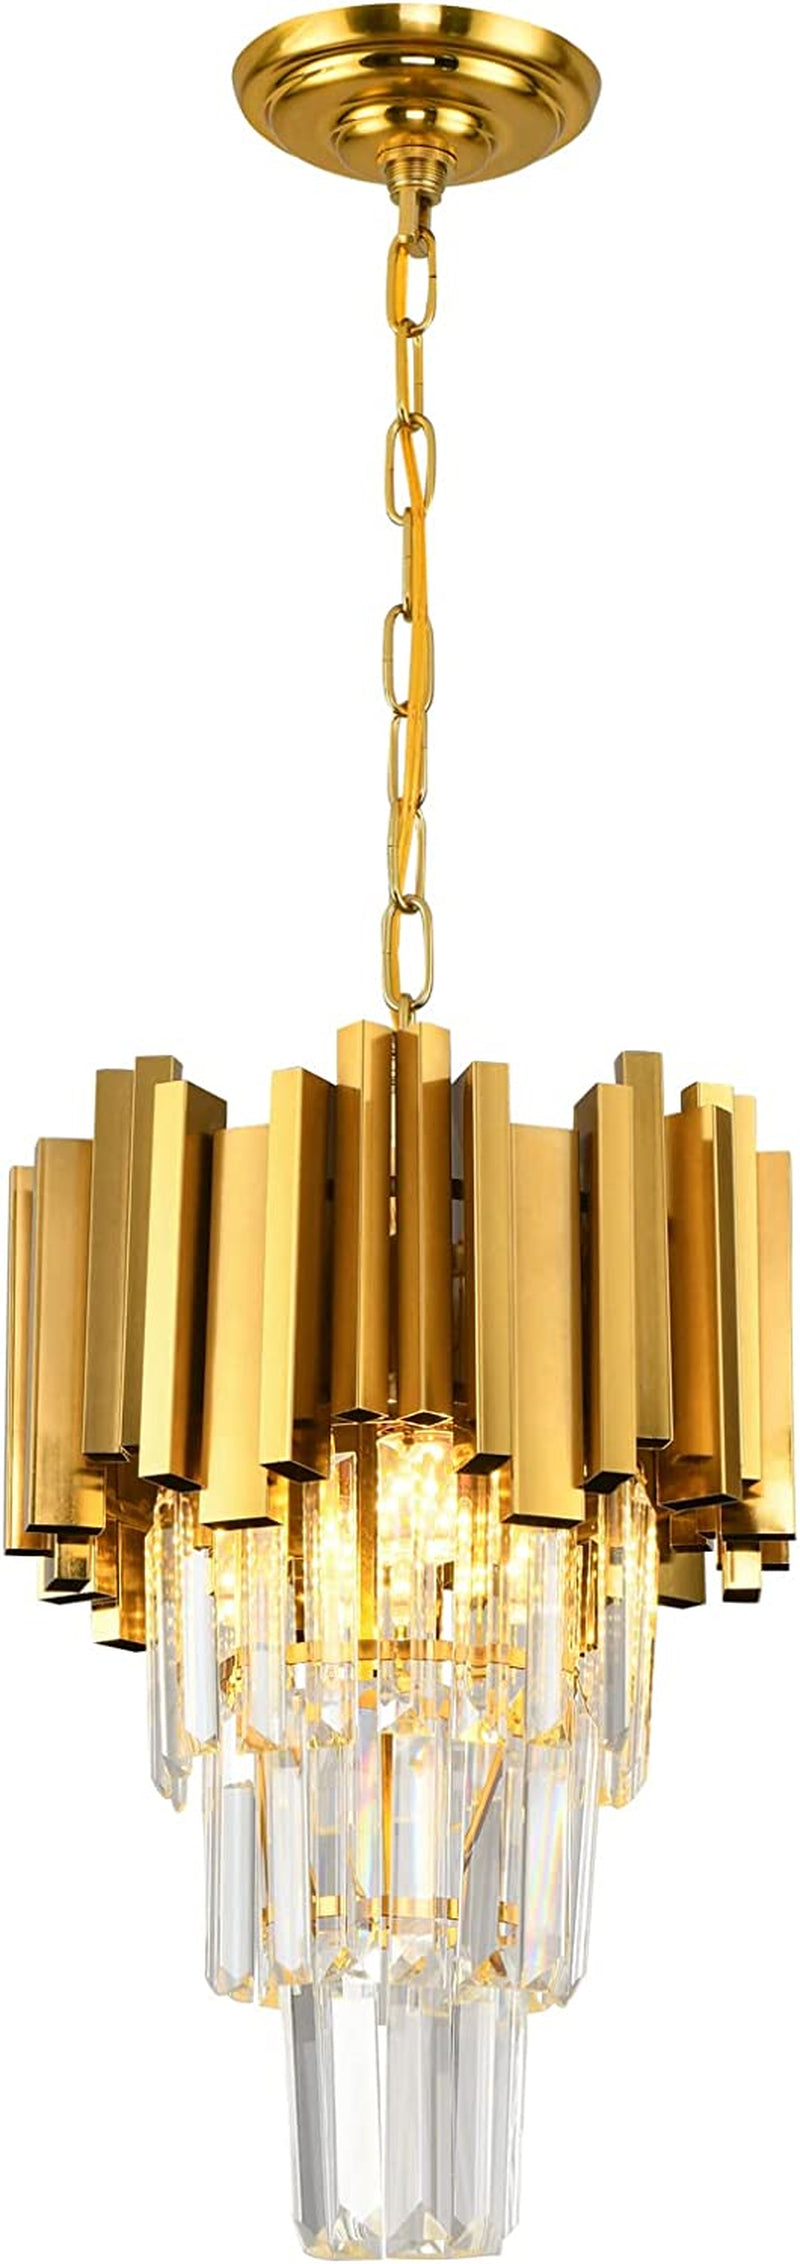 Modern Chandeliers Crystal with Light Gold Crystal Chandelier Hanging Ceiling Light Fixture 9 Lights Chandelier Modern Crystal round Pendant Light Fixture Dining Room Living Room Bedroom W22In Home & Garden > Lighting > Lighting Fixtures > Chandeliers AKDXIRUN Gold 1/W11.8in  